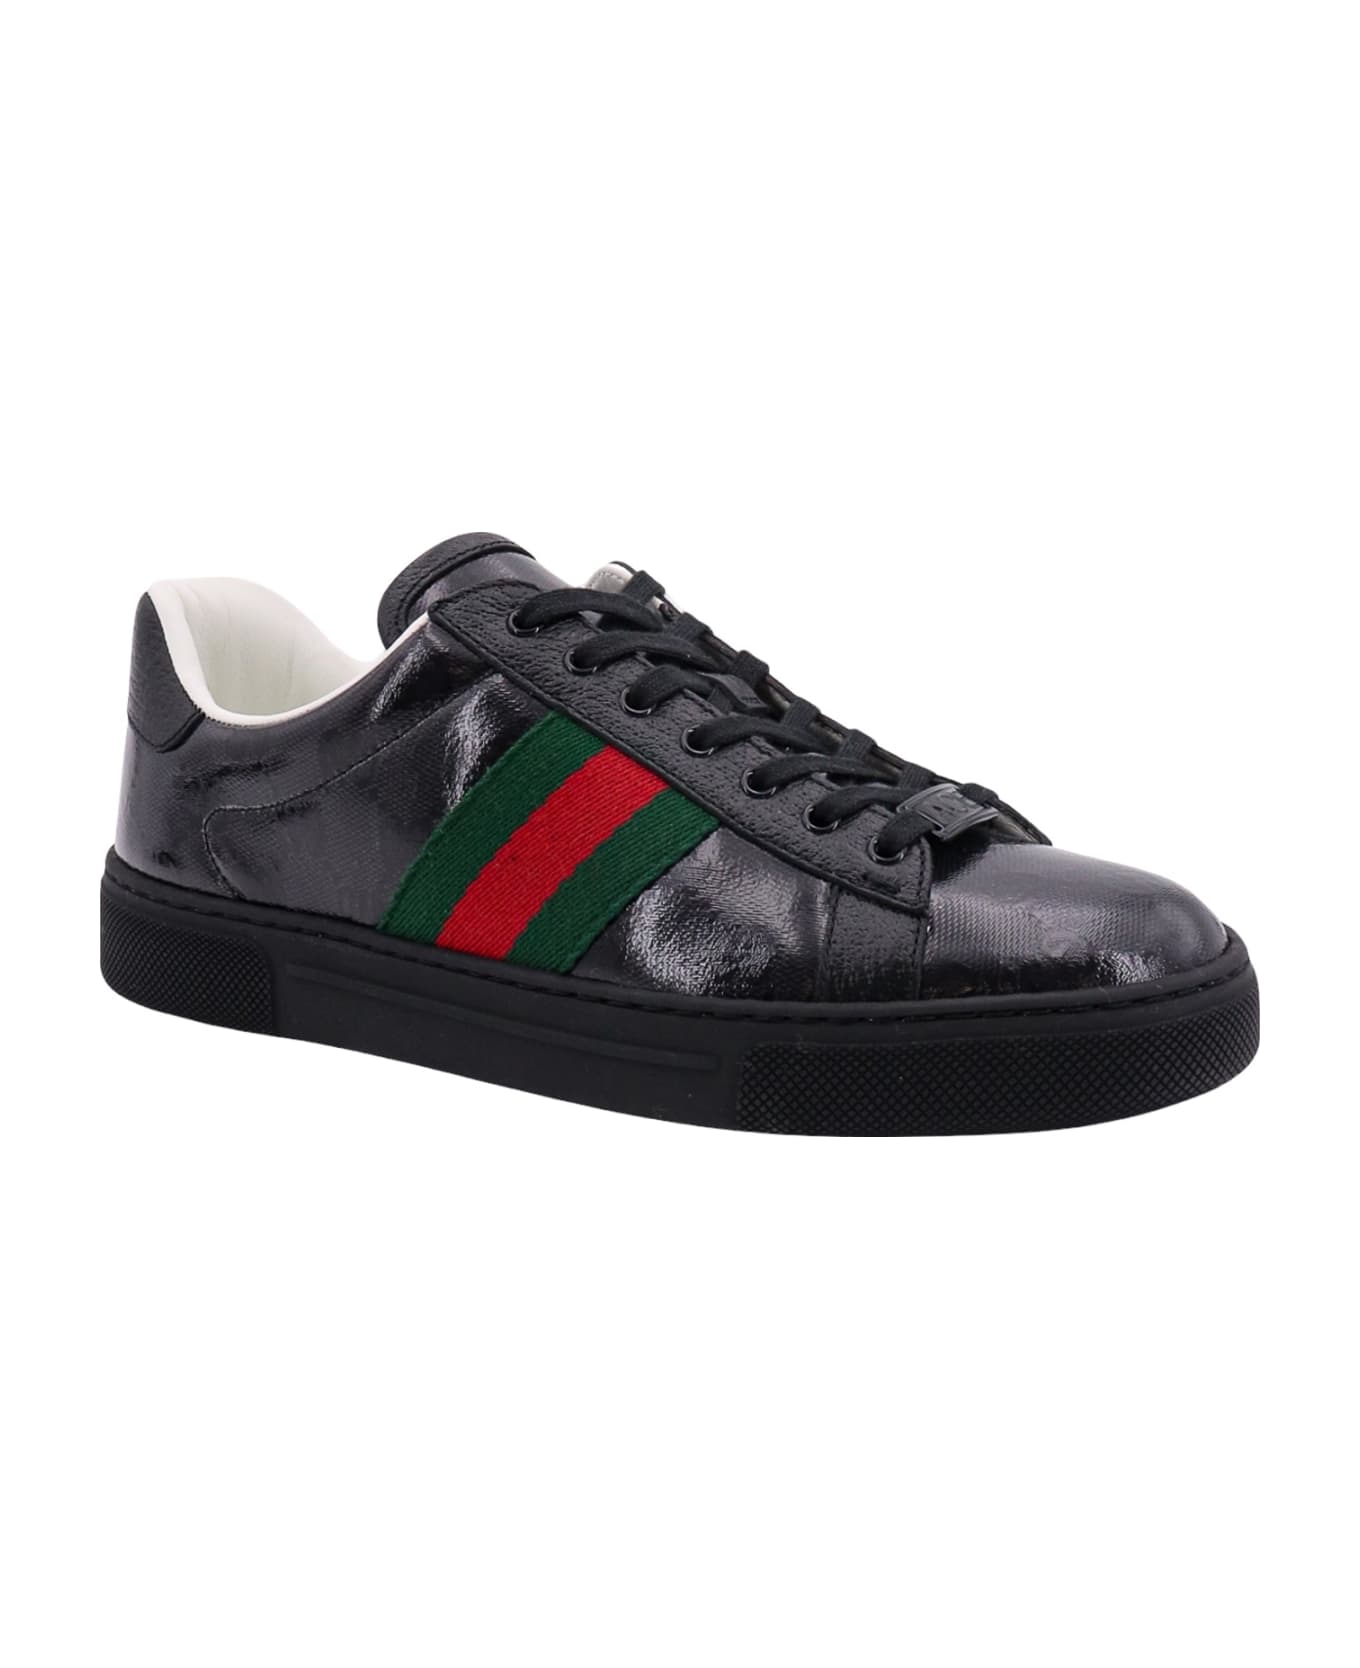 Gucci Ace Sneakers - Black スニーカー